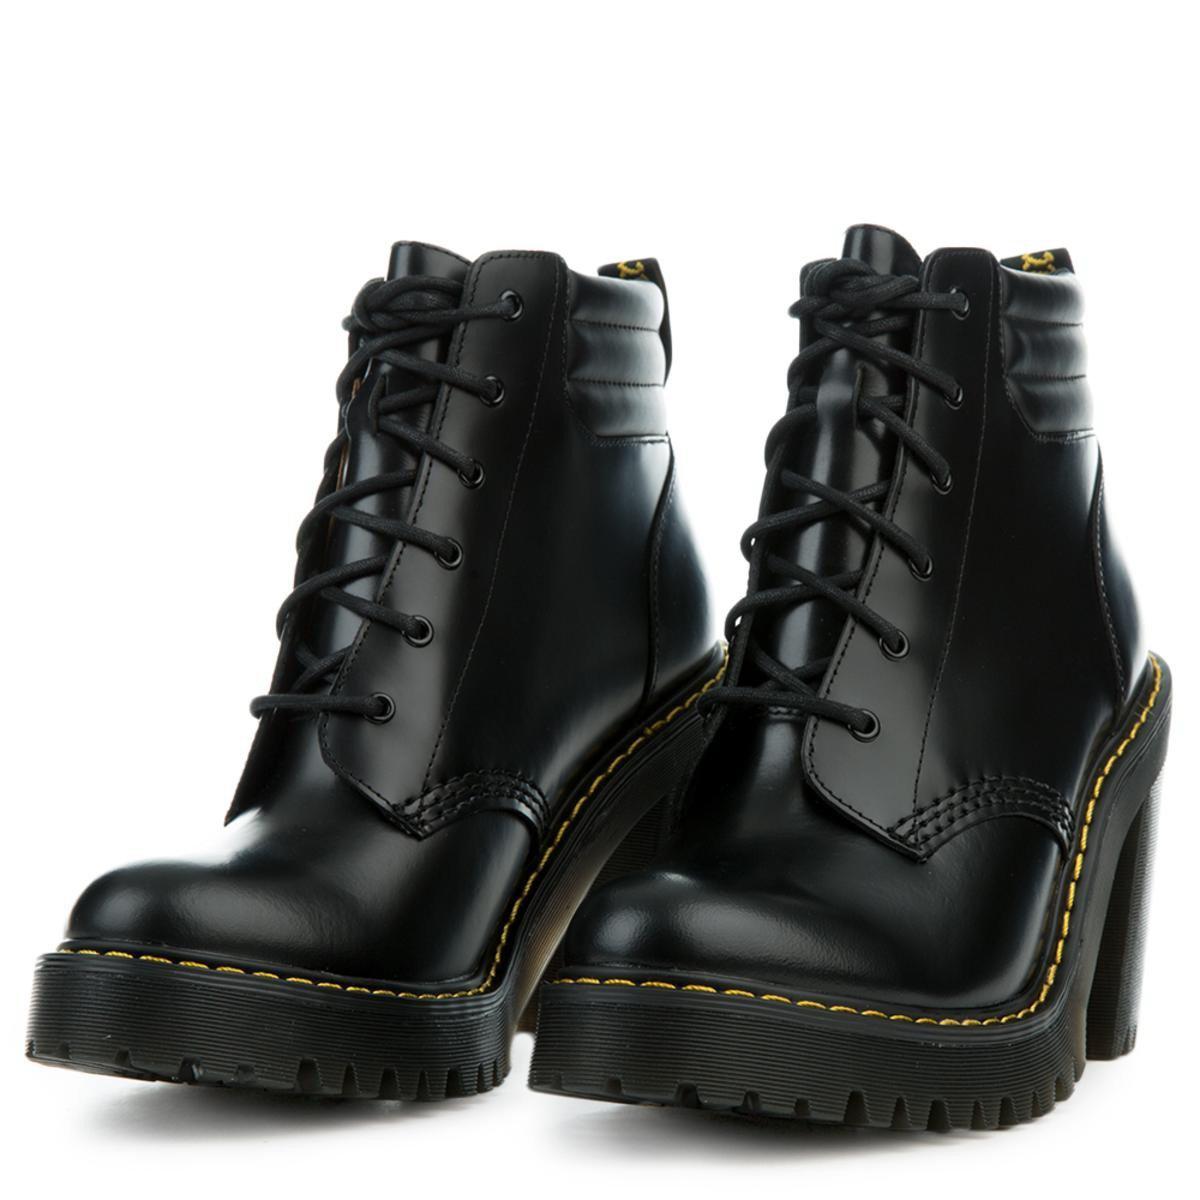 Dr. Martens Leather Persephone Black Buttero Boots - Lyst